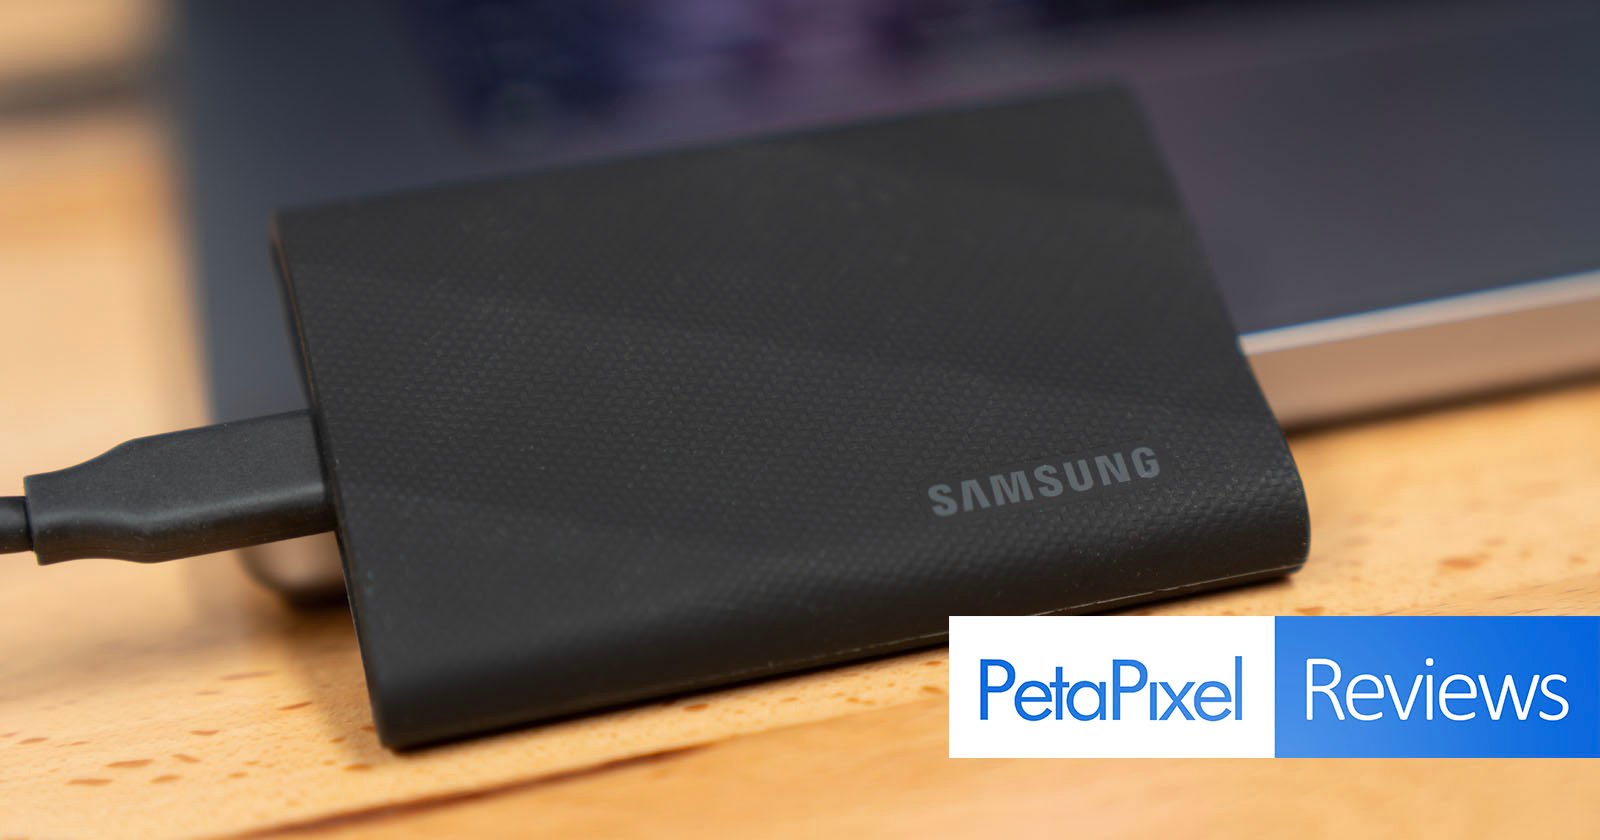 Samsungs New Compact T9 Shield SSD is Much Faster and More Stylish